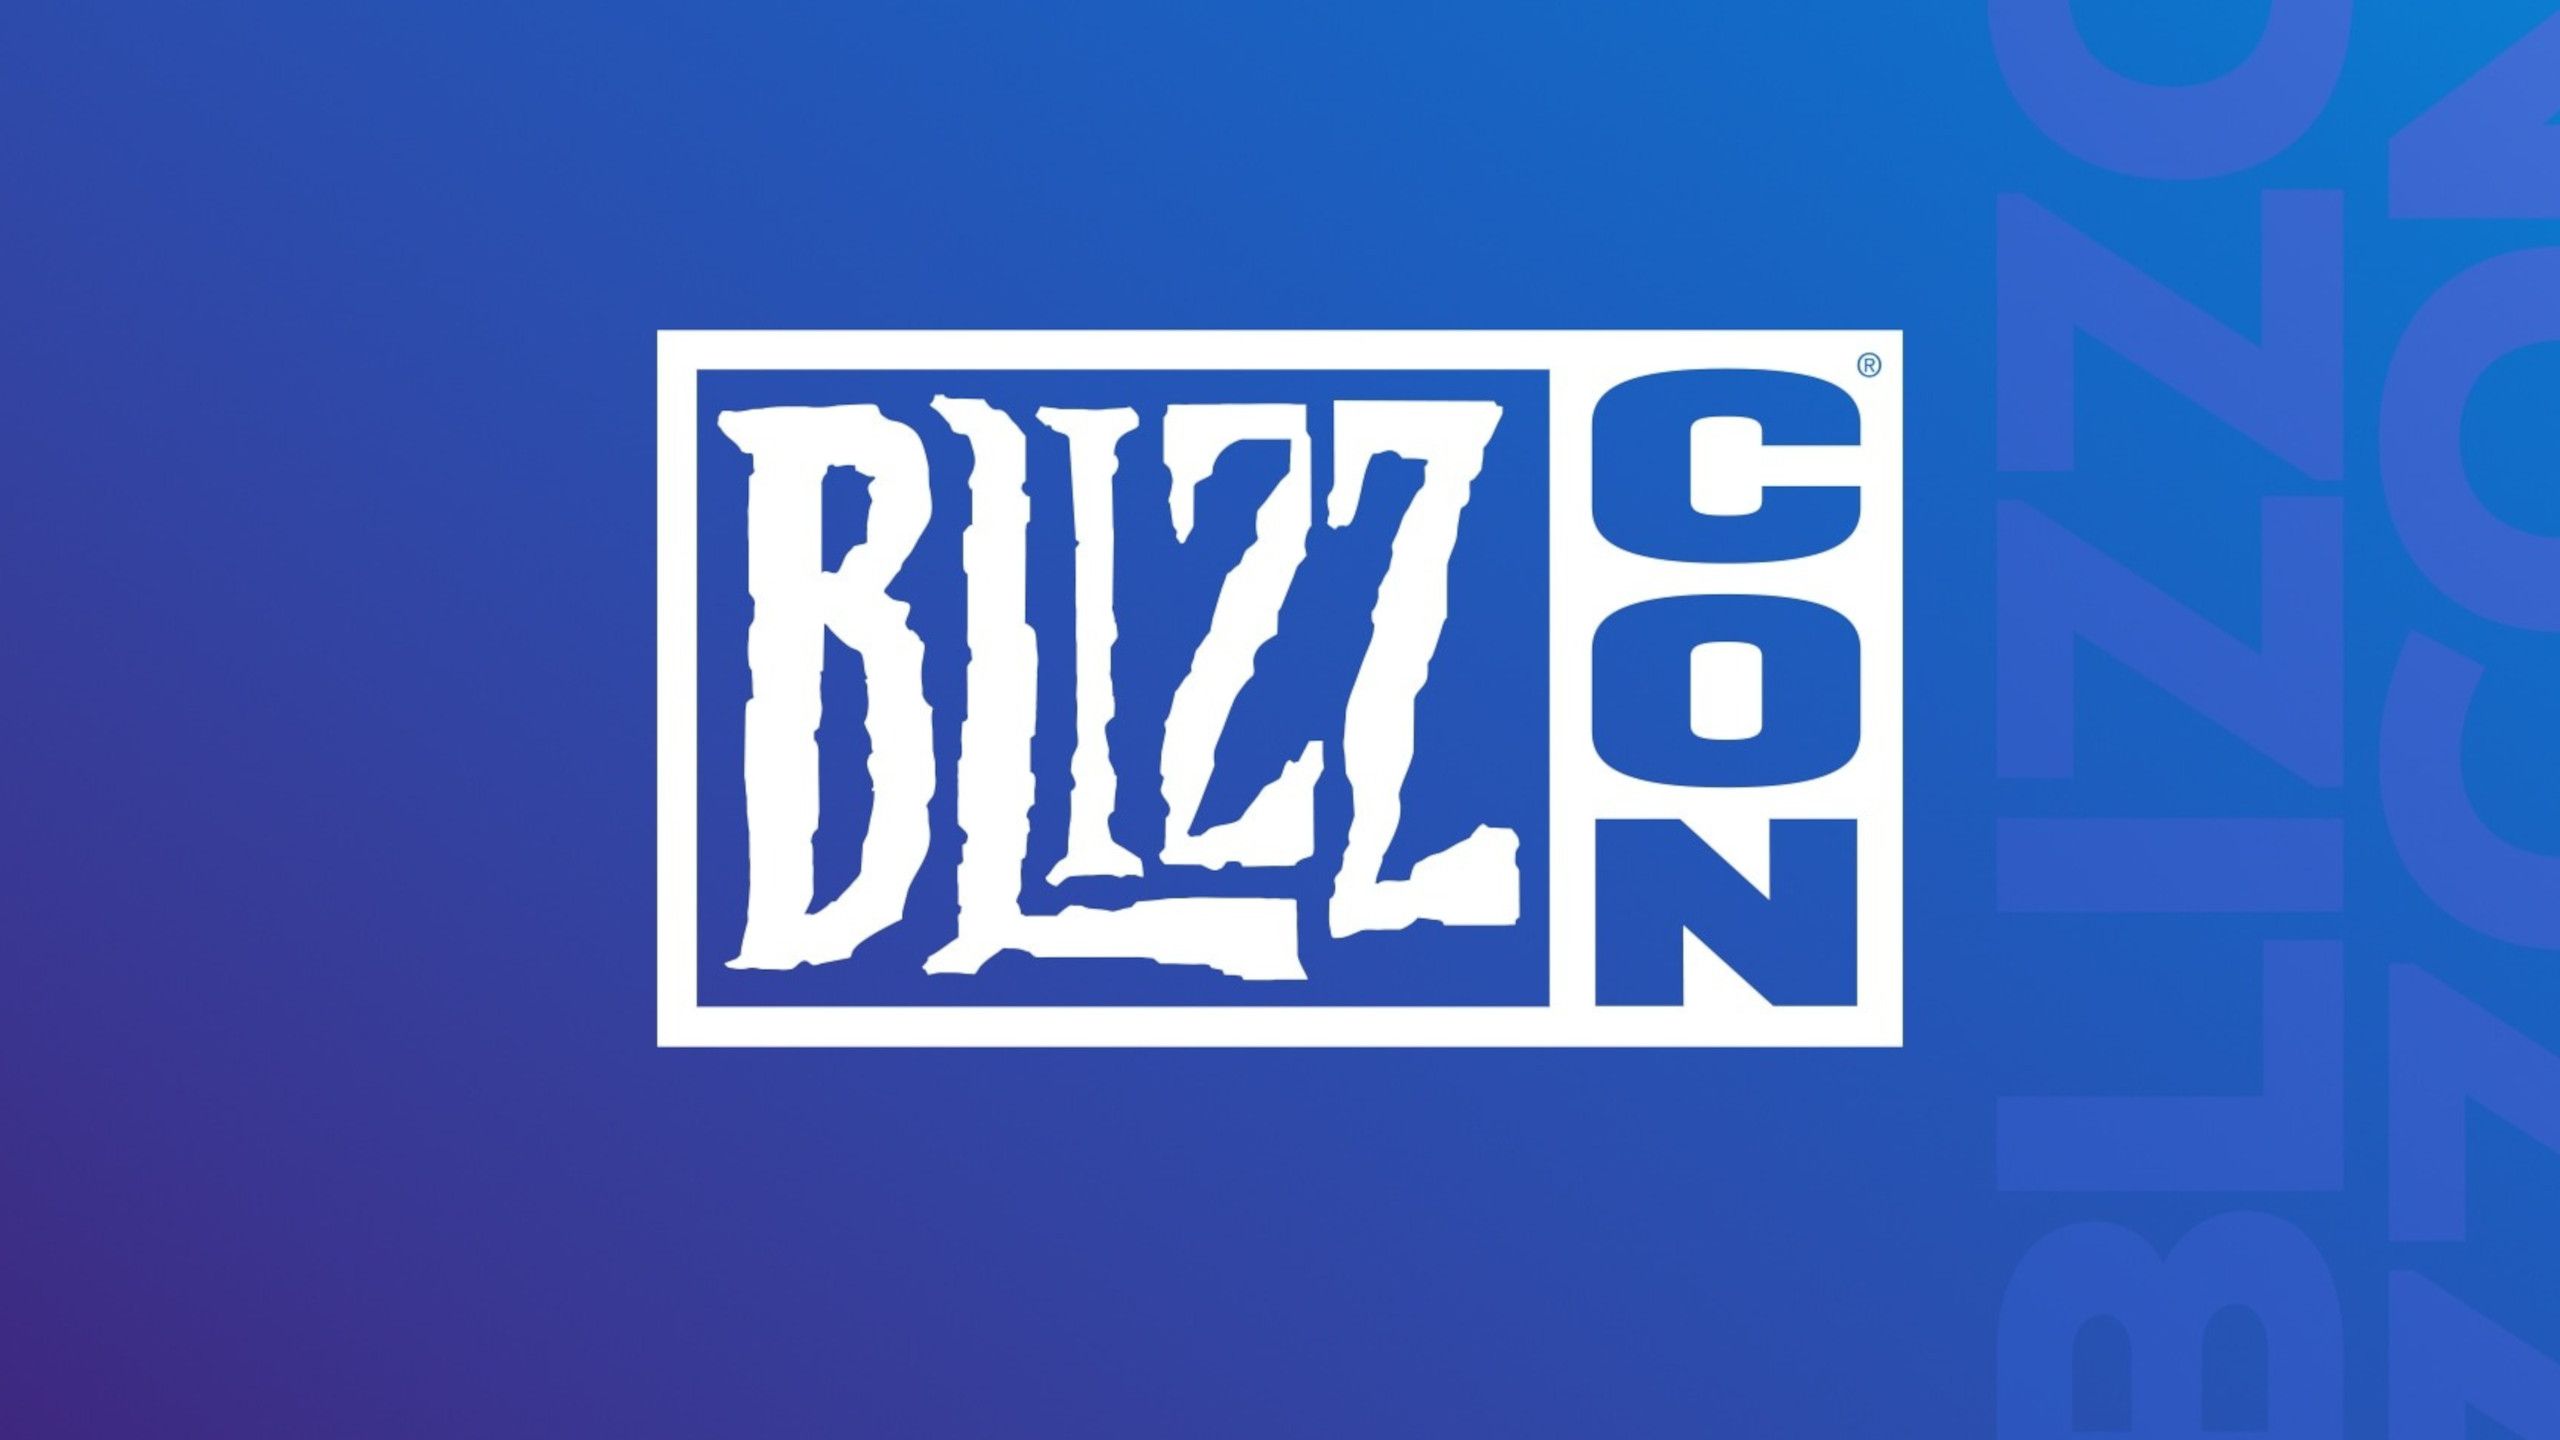 BlizzCon 2024 is cancelled